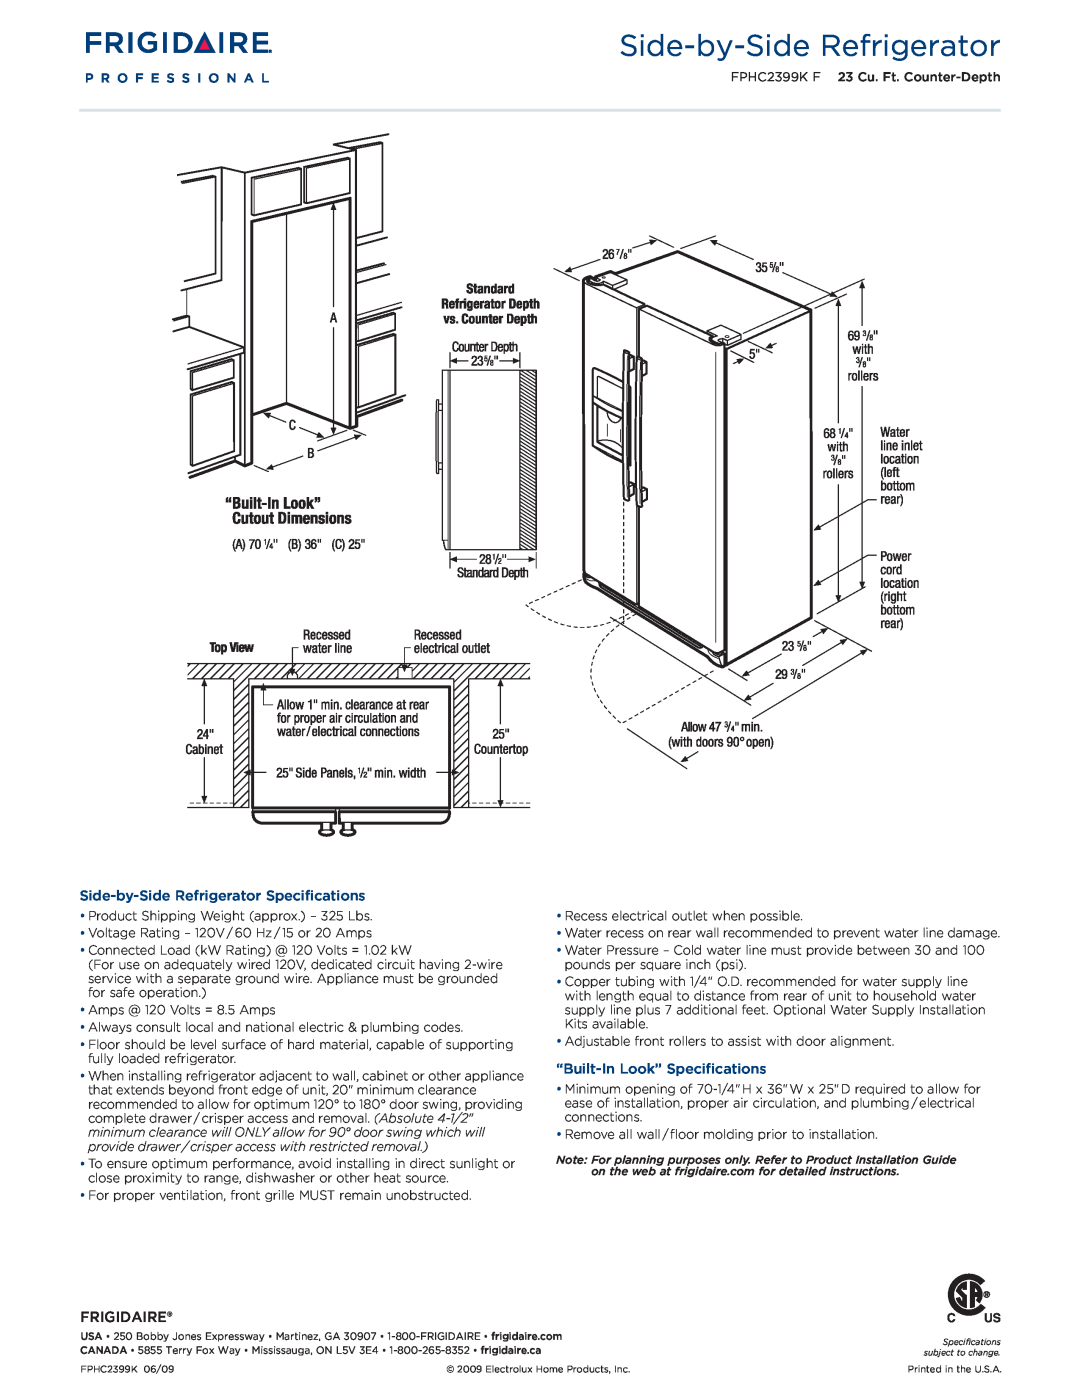 Frigidaire FPHC2399KF dimensions Side-by-SideRefrigerator Specifications, “Built-InLook” Specifications, Frigidaire 